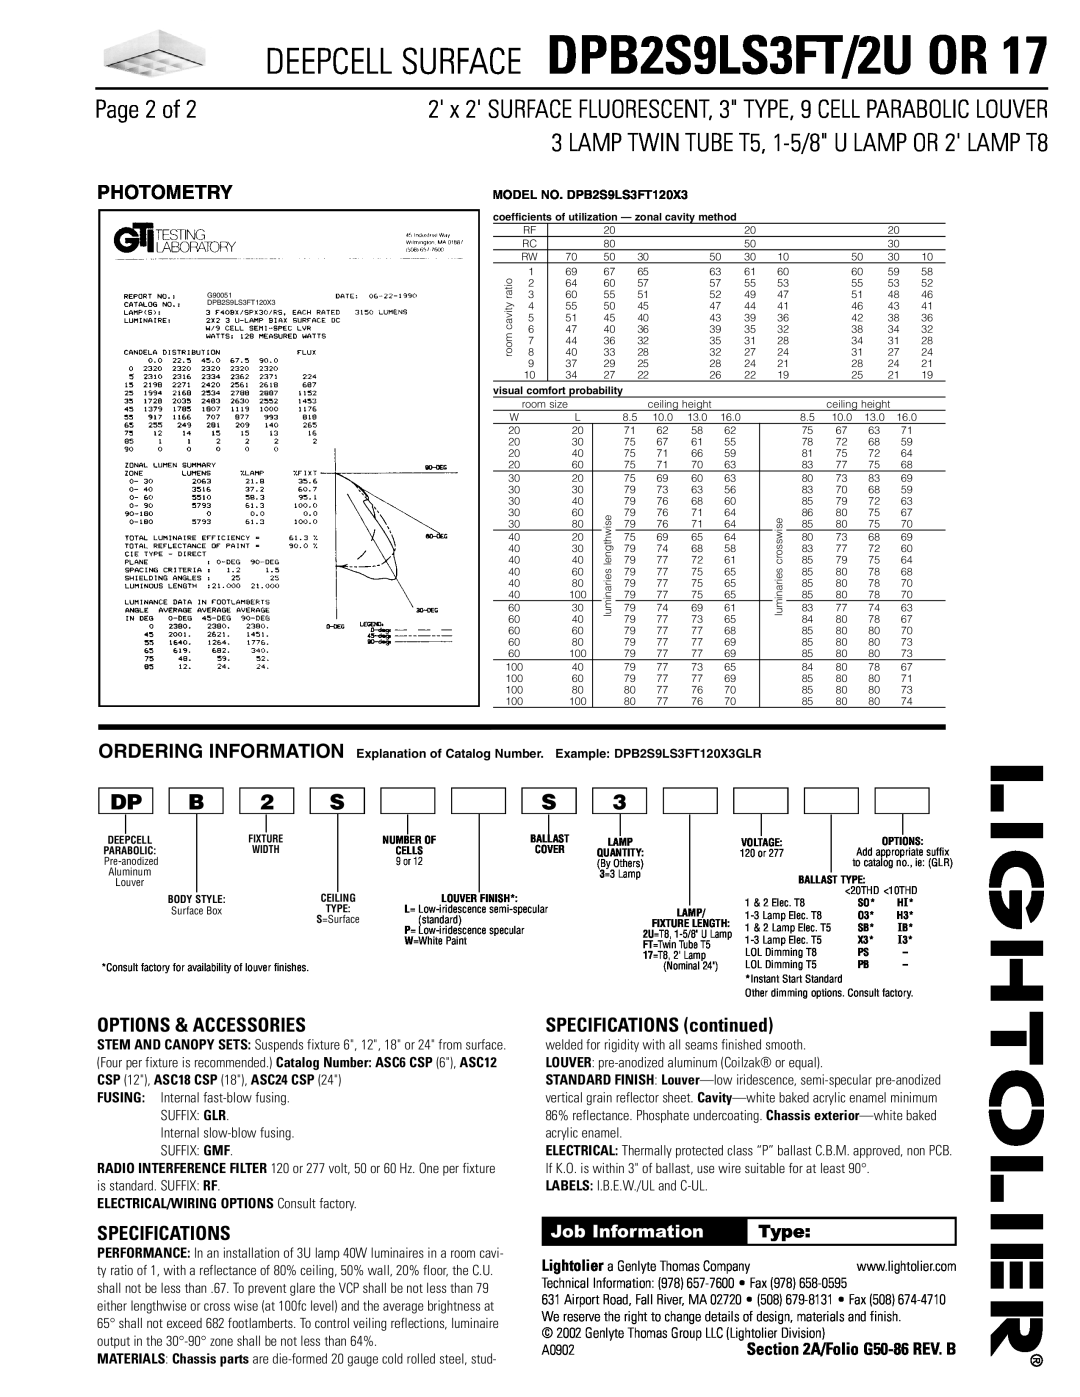 Lightolier DPB2S9LS3FT/2U Page 2 of, Photometry, Options & Accessories, Specifications, SPECIFICATIONS continued, Type 